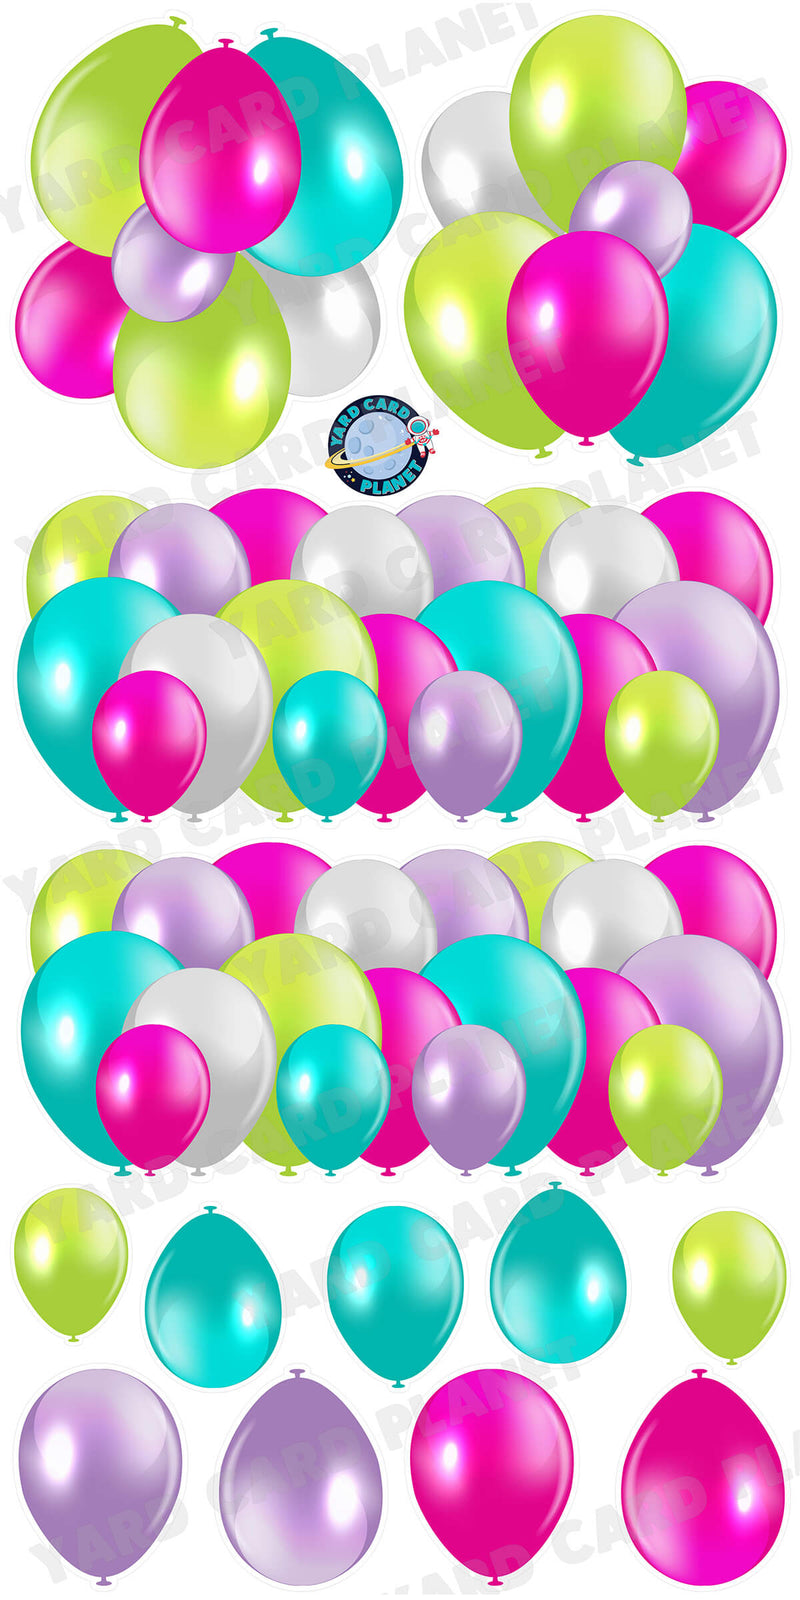 Pastel Multi-Colored Balloon Panels, Bouquets and Singles Yard Card Set